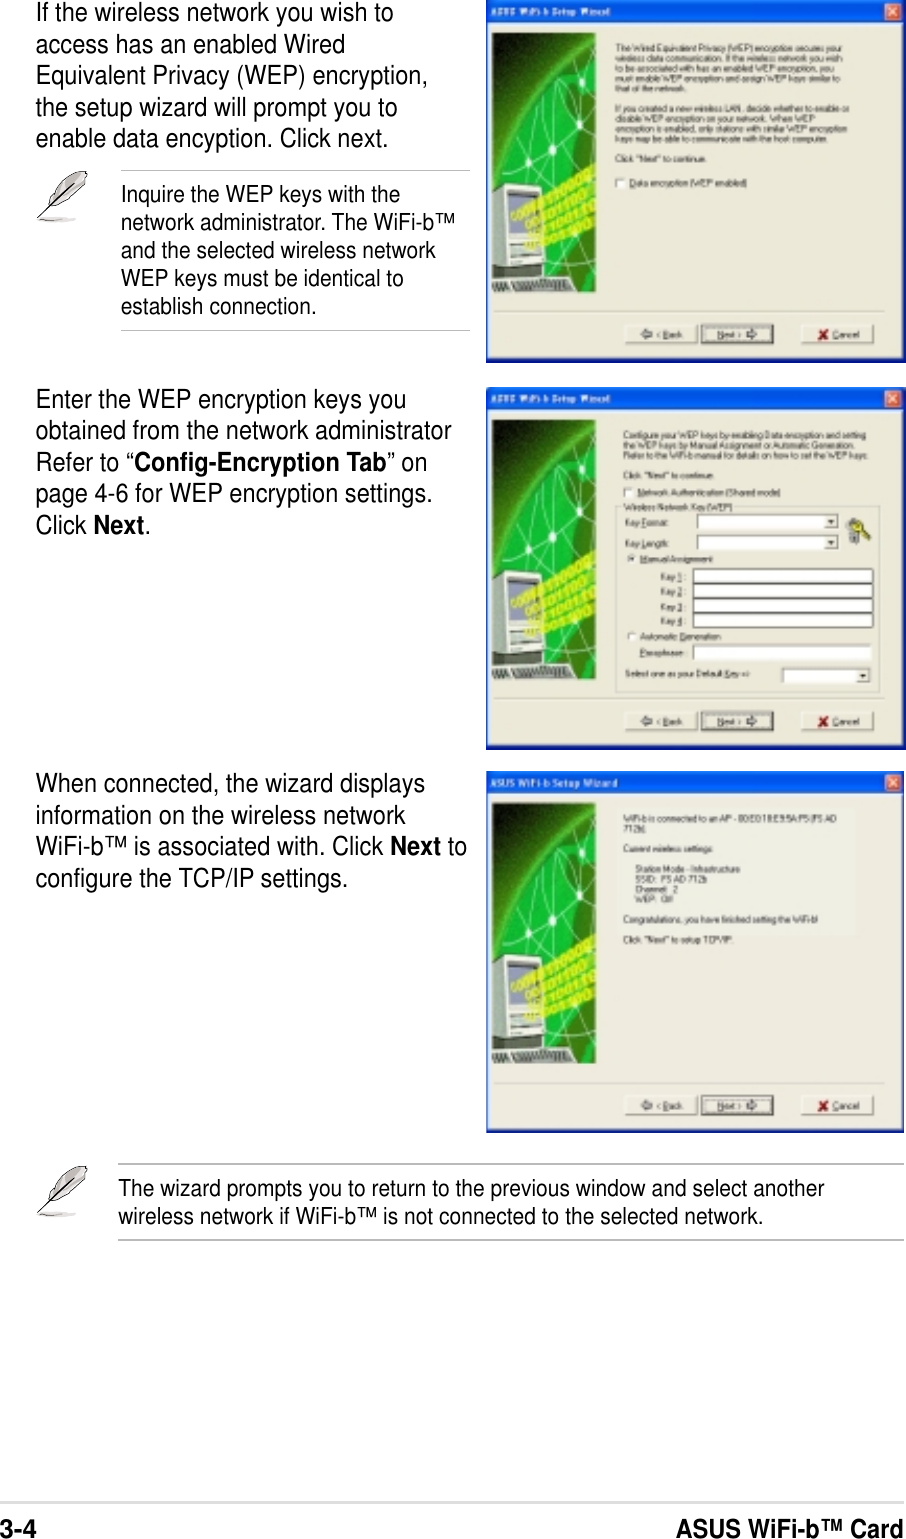 3-4ASUS WiFi-b™ CardWhen connected, the wizard displaysinformation on the wireless networkWiFi-b™ is associated with. Click Next toconfigure the TCP/IP settings.If the wireless network you wish toaccess has an enabled WiredEquivalent Privacy (WEP) encryption,the setup wizard will prompt you toenable data encyption. Click next.Inquire the WEP keys with thenetwork administrator. The WiFi-b™and the selected wireless networkWEP keys must be identical toestablish connection.Enter the WEP encryption keys youobtained from the network administratorRefer to “Config-Encryption Tab” onpage 4-6 for WEP encryption settings.Click Next.The wizard prompts you to return to the previous window and select anotherwireless network if WiFi-b™ is not connected to the selected network.